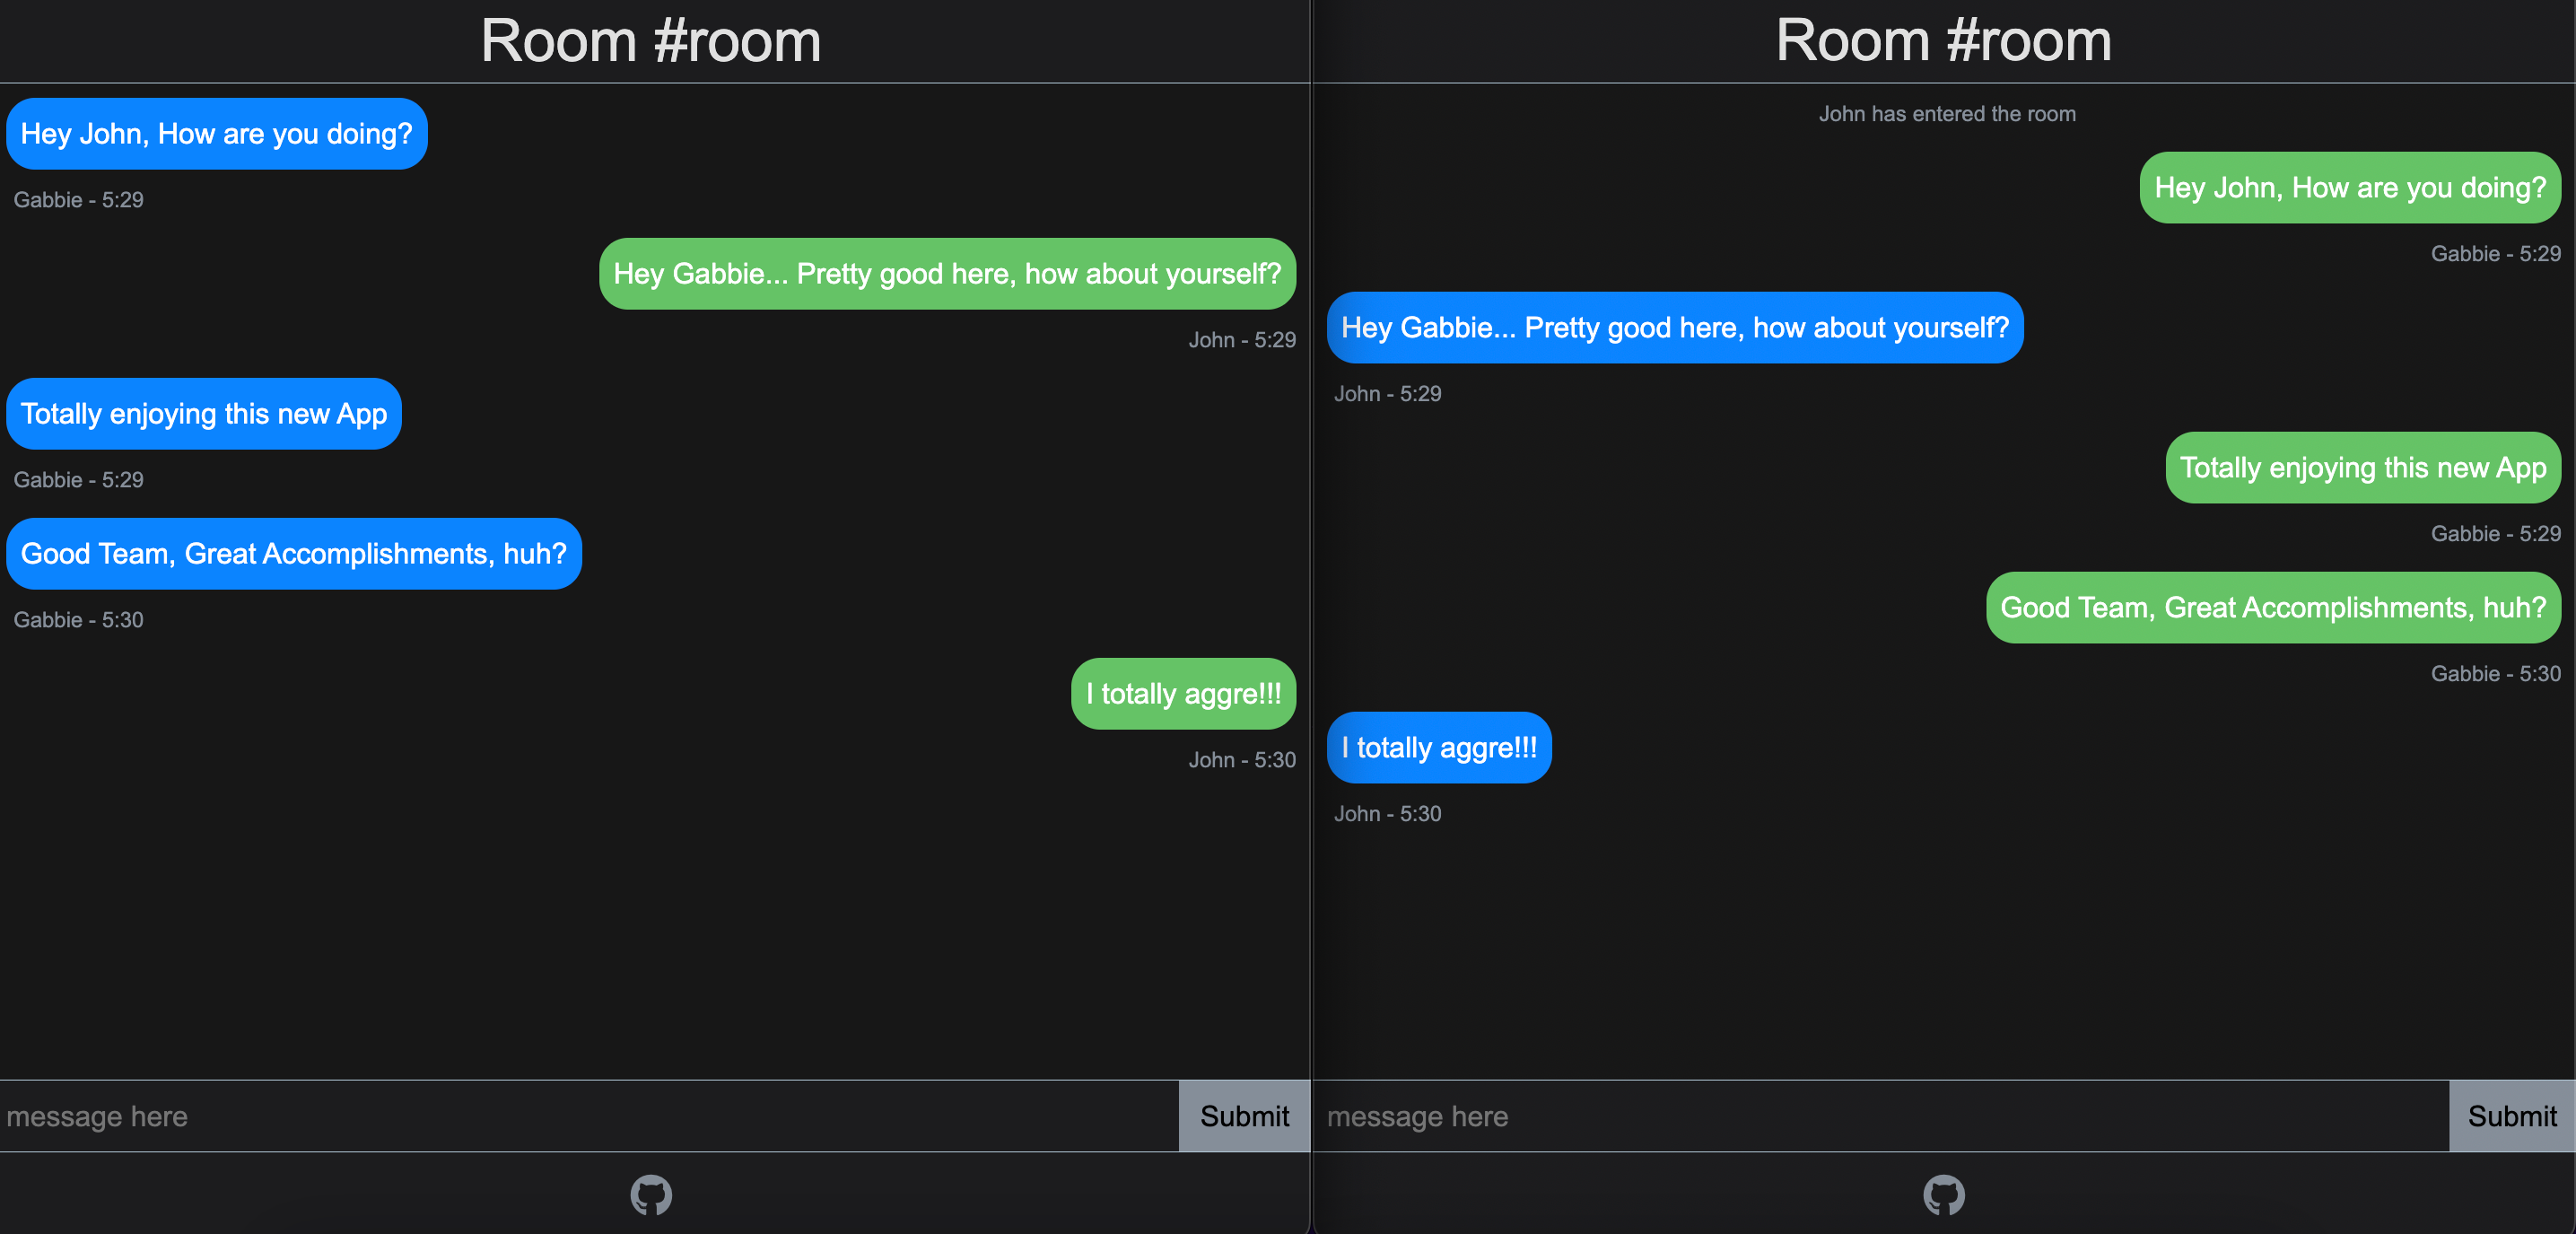 Image of Chat Room